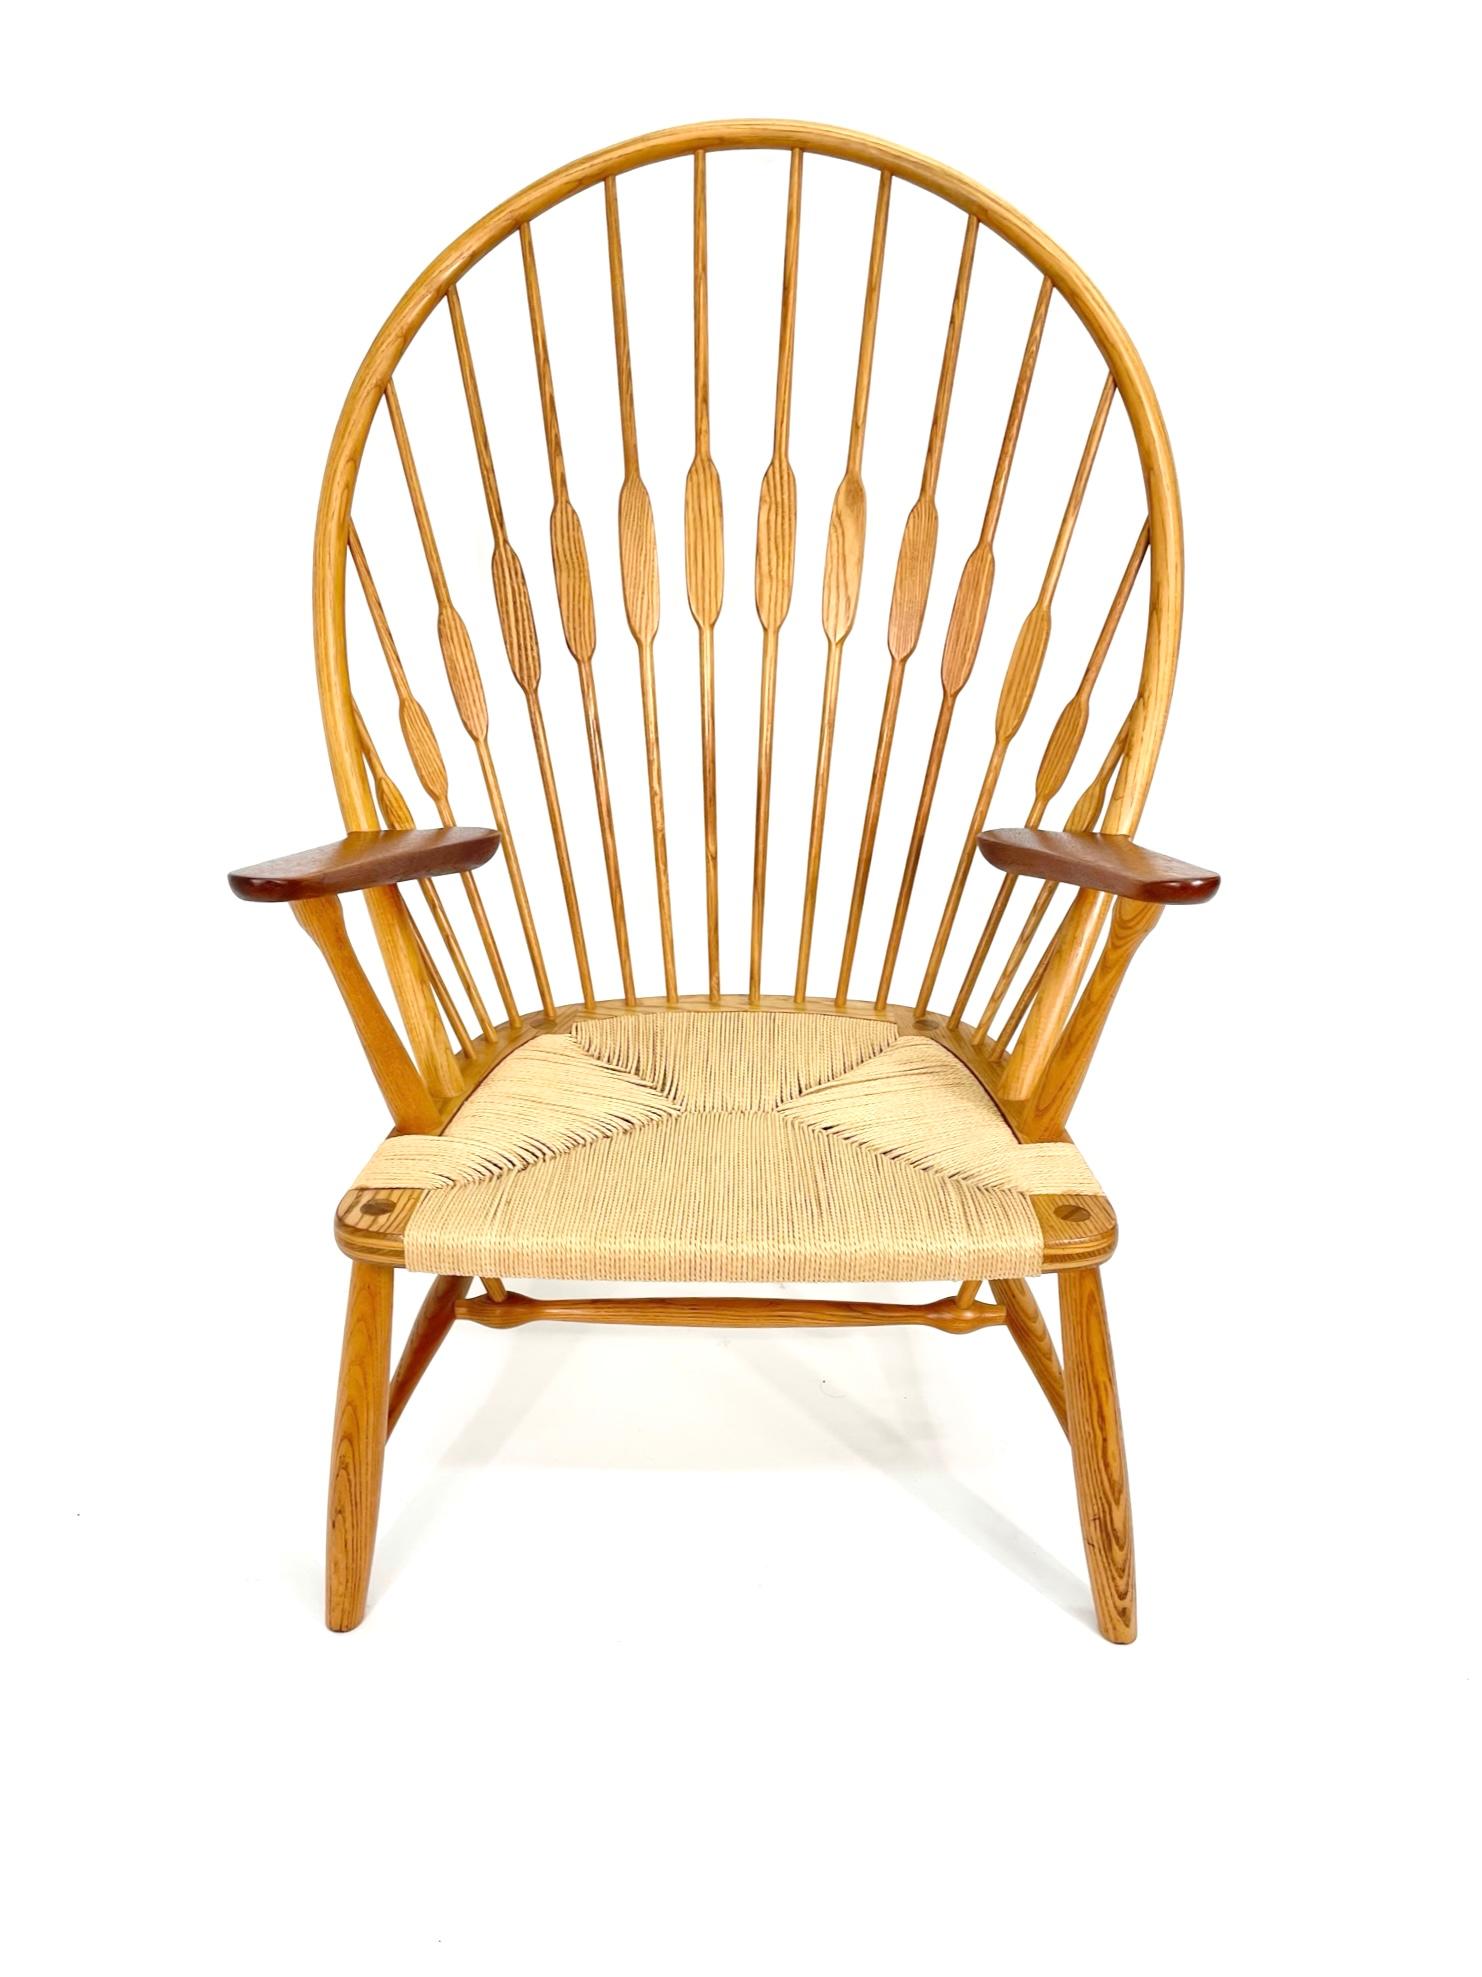 Modeled after a traditional American Windsor chair, Hans Wegner’s Peacock chair strips the form to reveal its construction while retaining aesthetic, decorative impact. The chair reveals a modernist approach to designing around the human body and